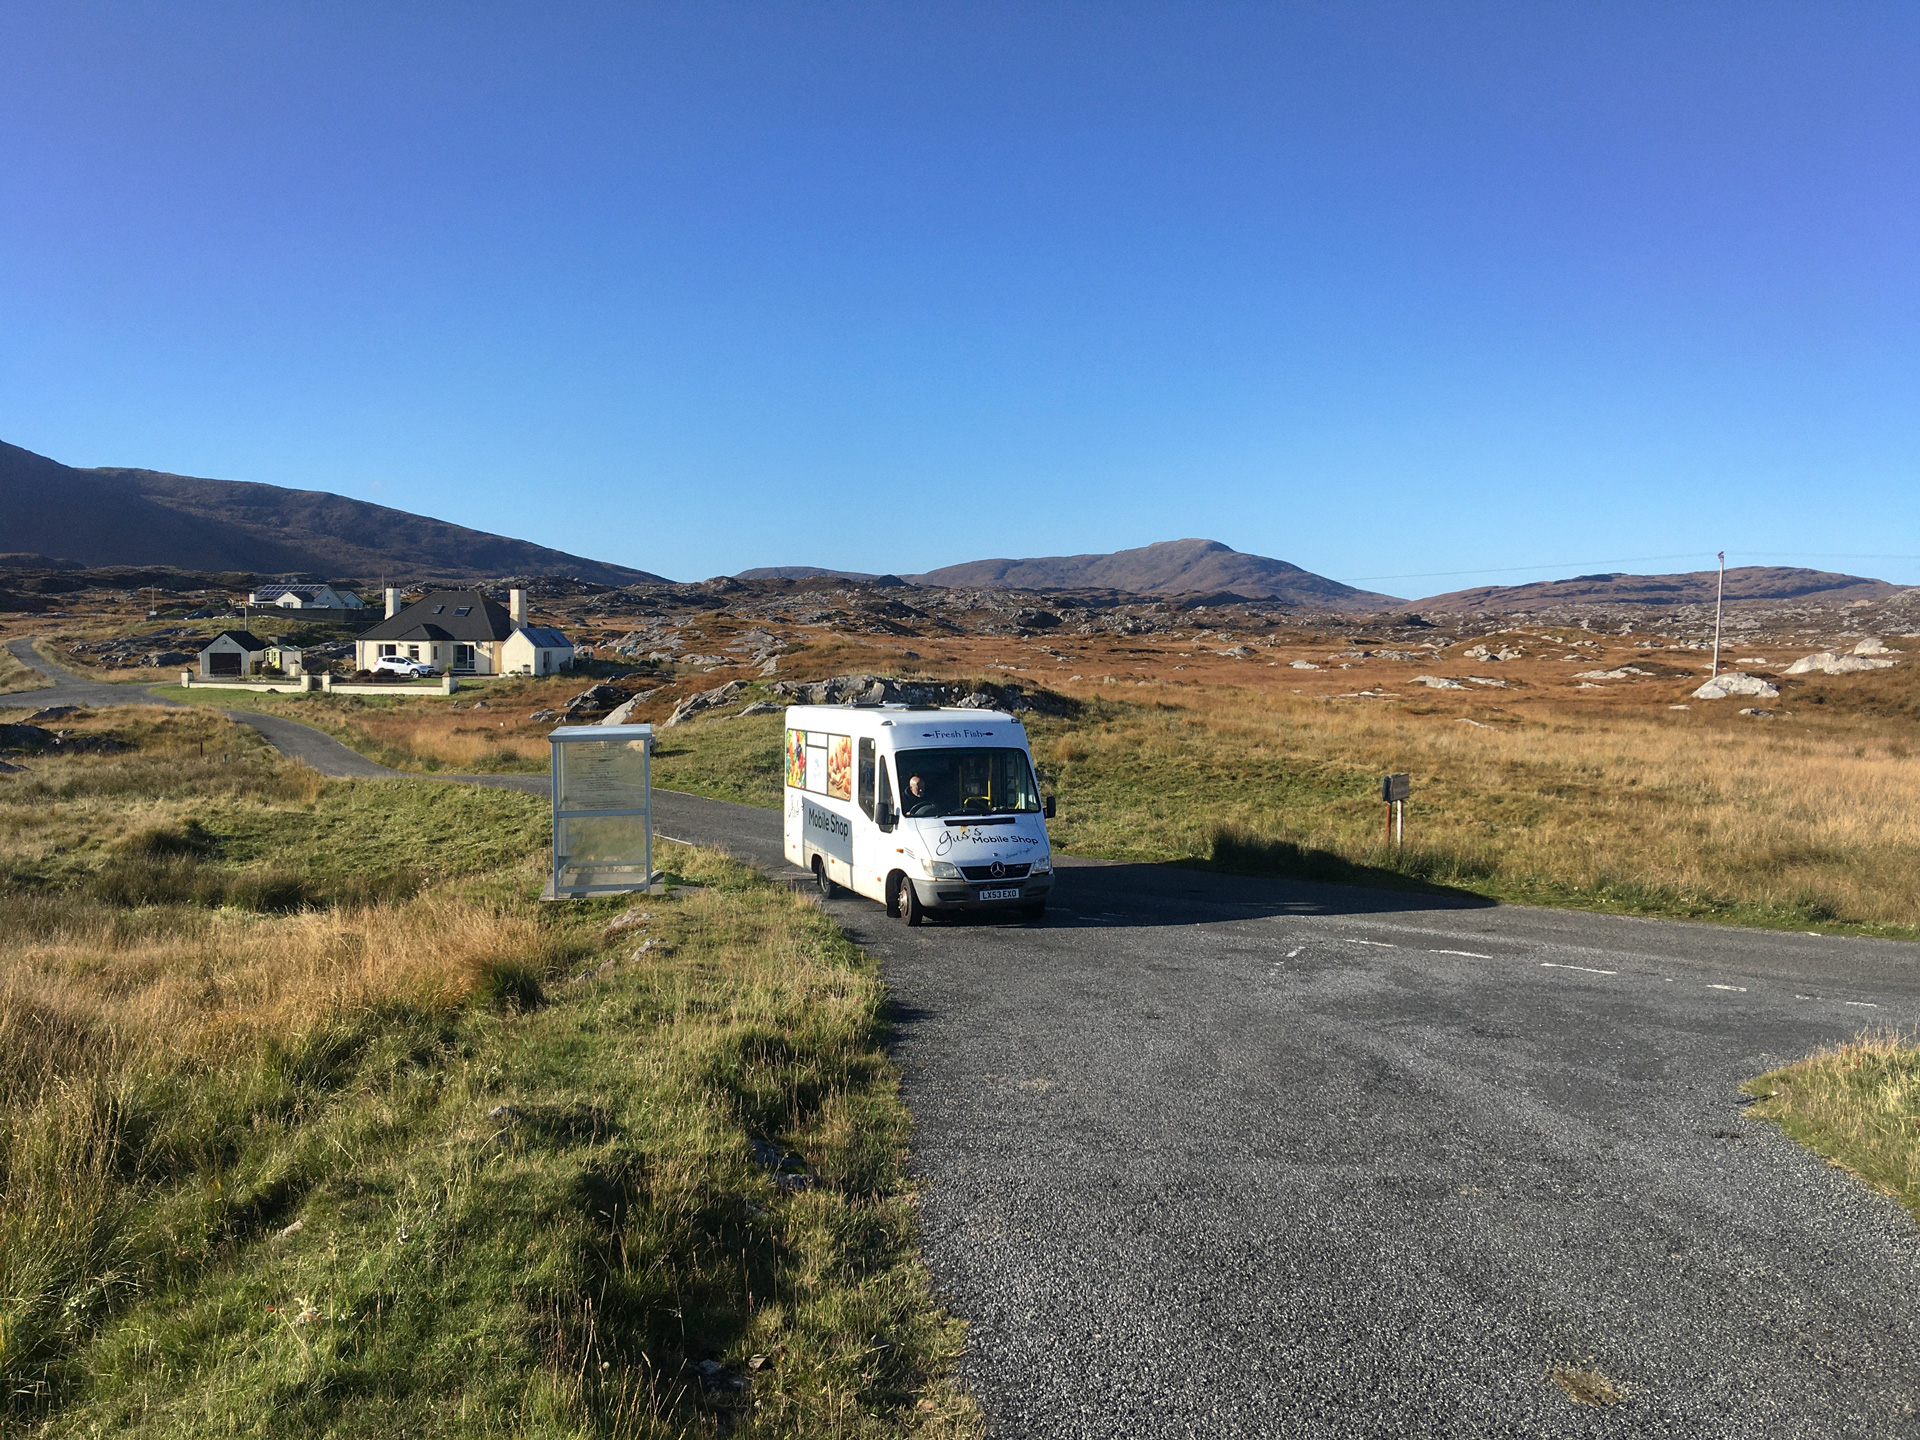 gus driving mobile shop countryside blue sky isle of harris outer hebrides